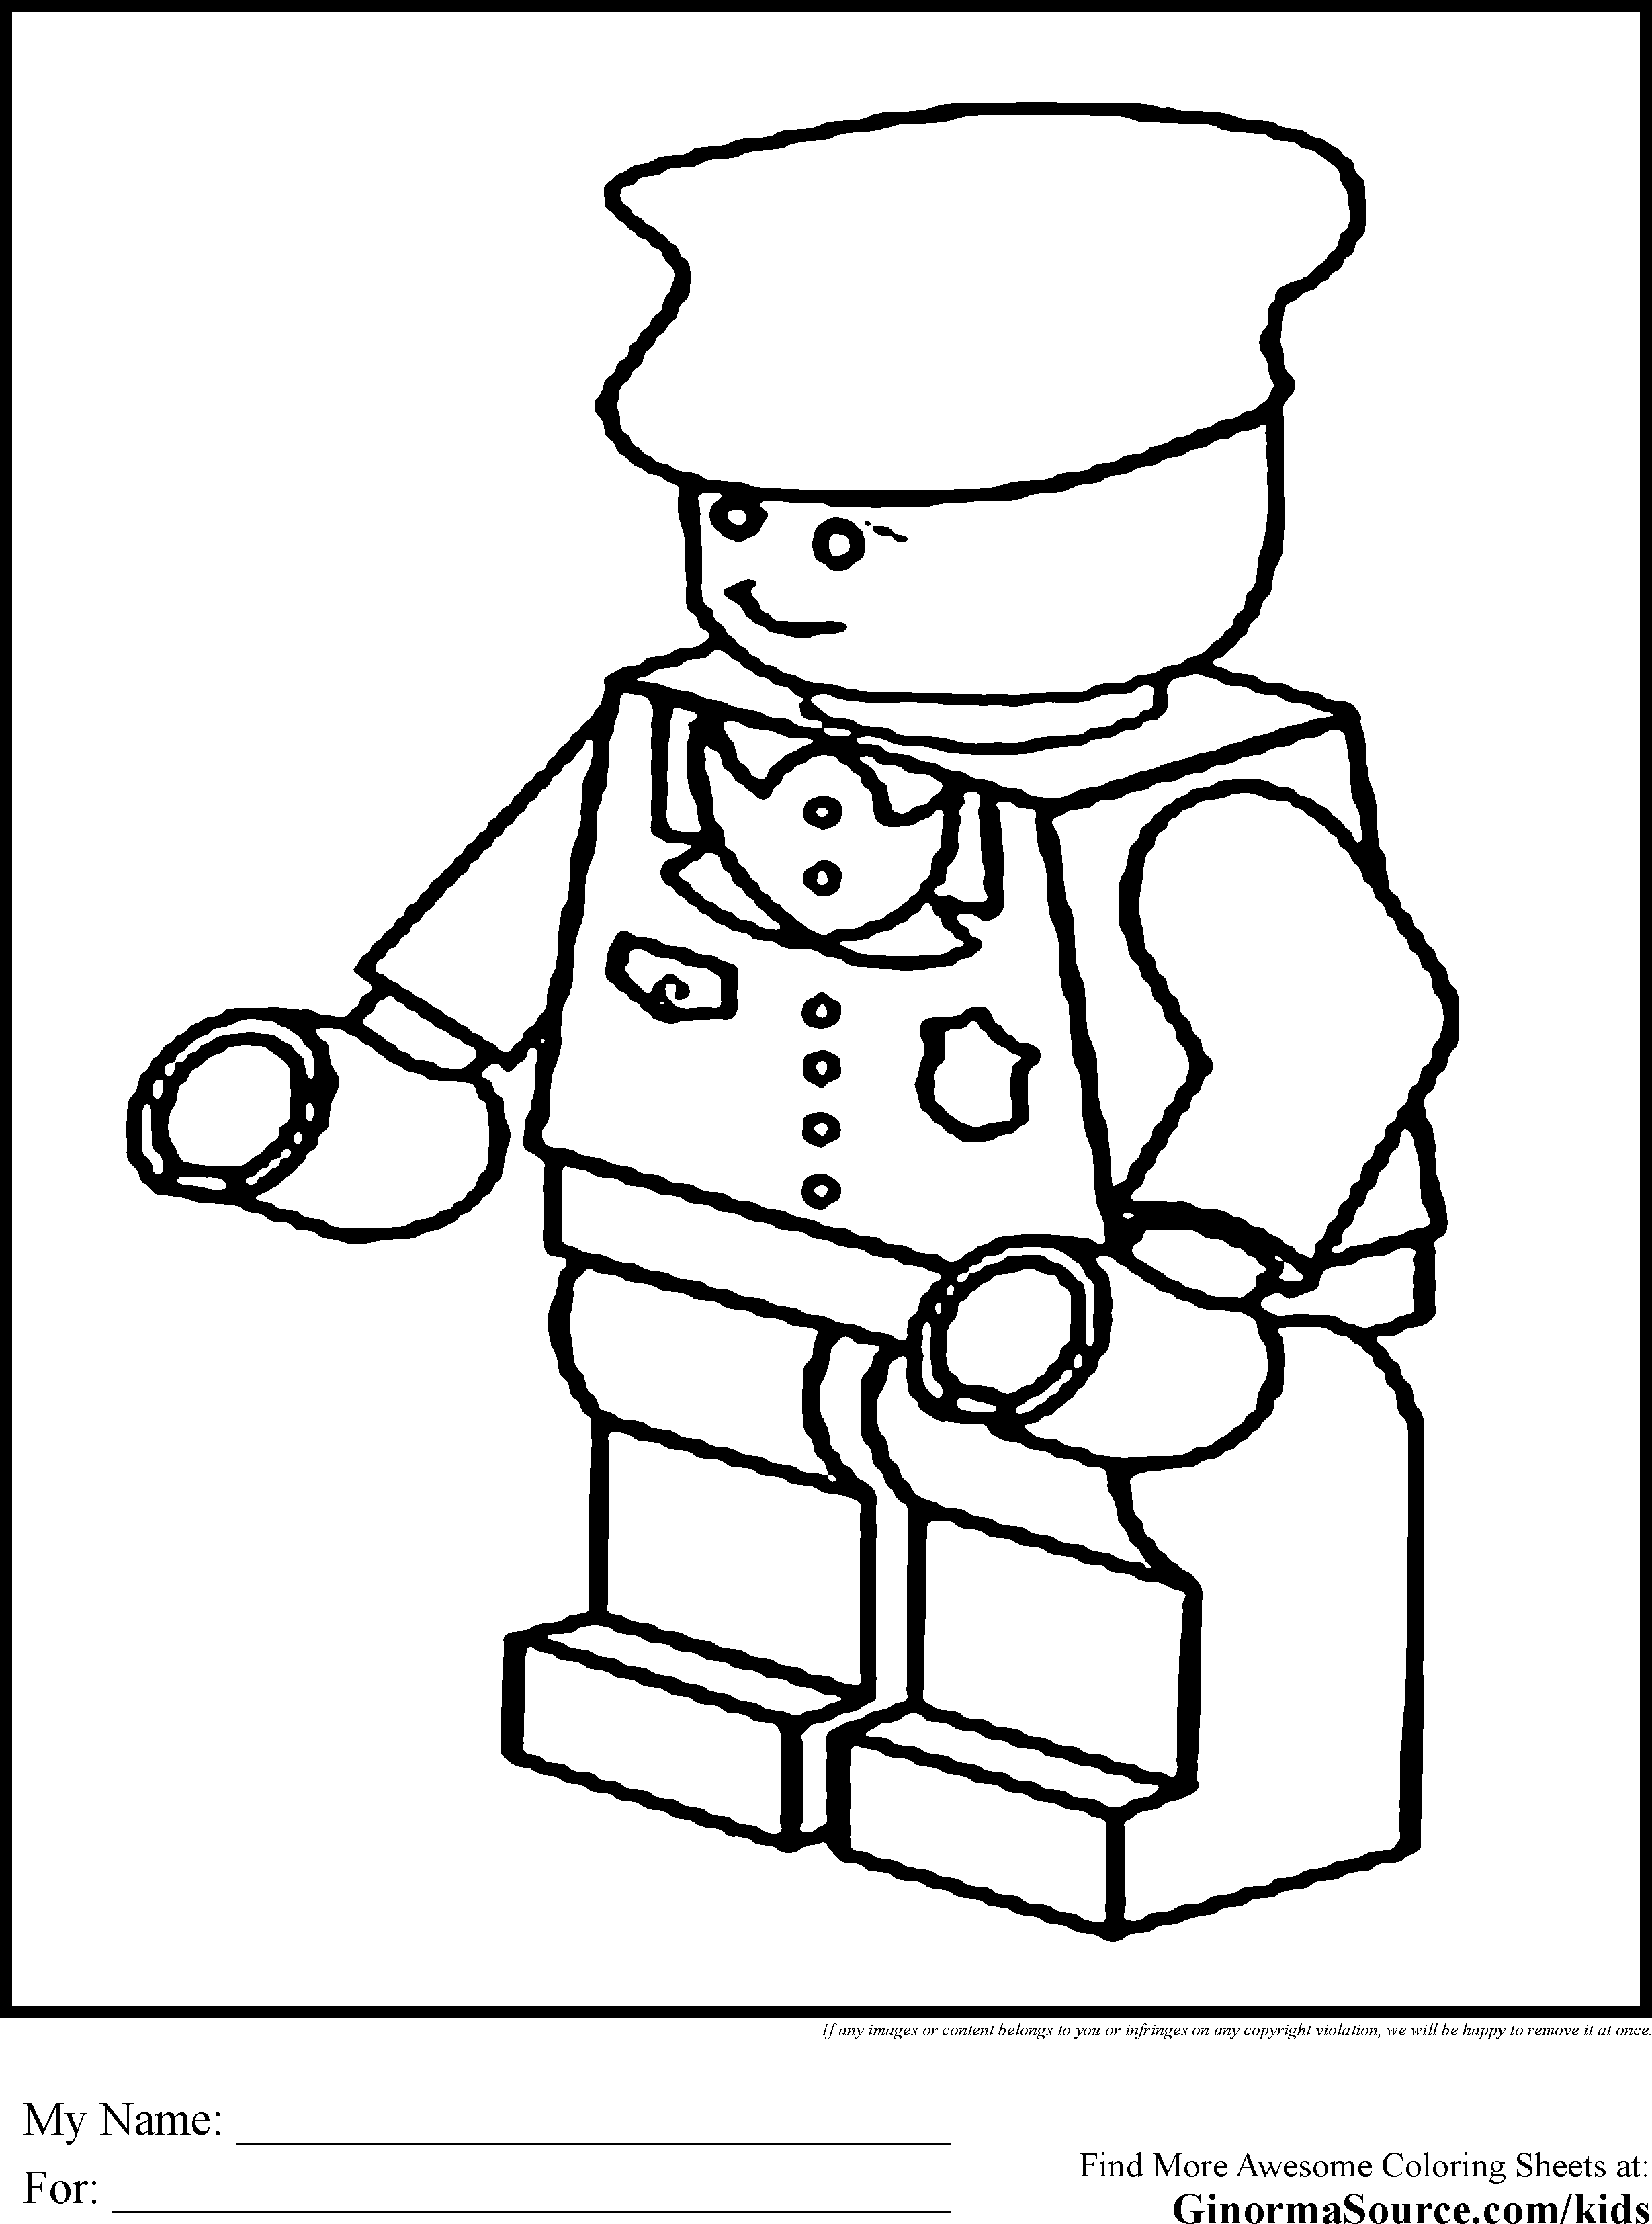 Lego Colouring Pages Printable - High Quality Coloring Pages